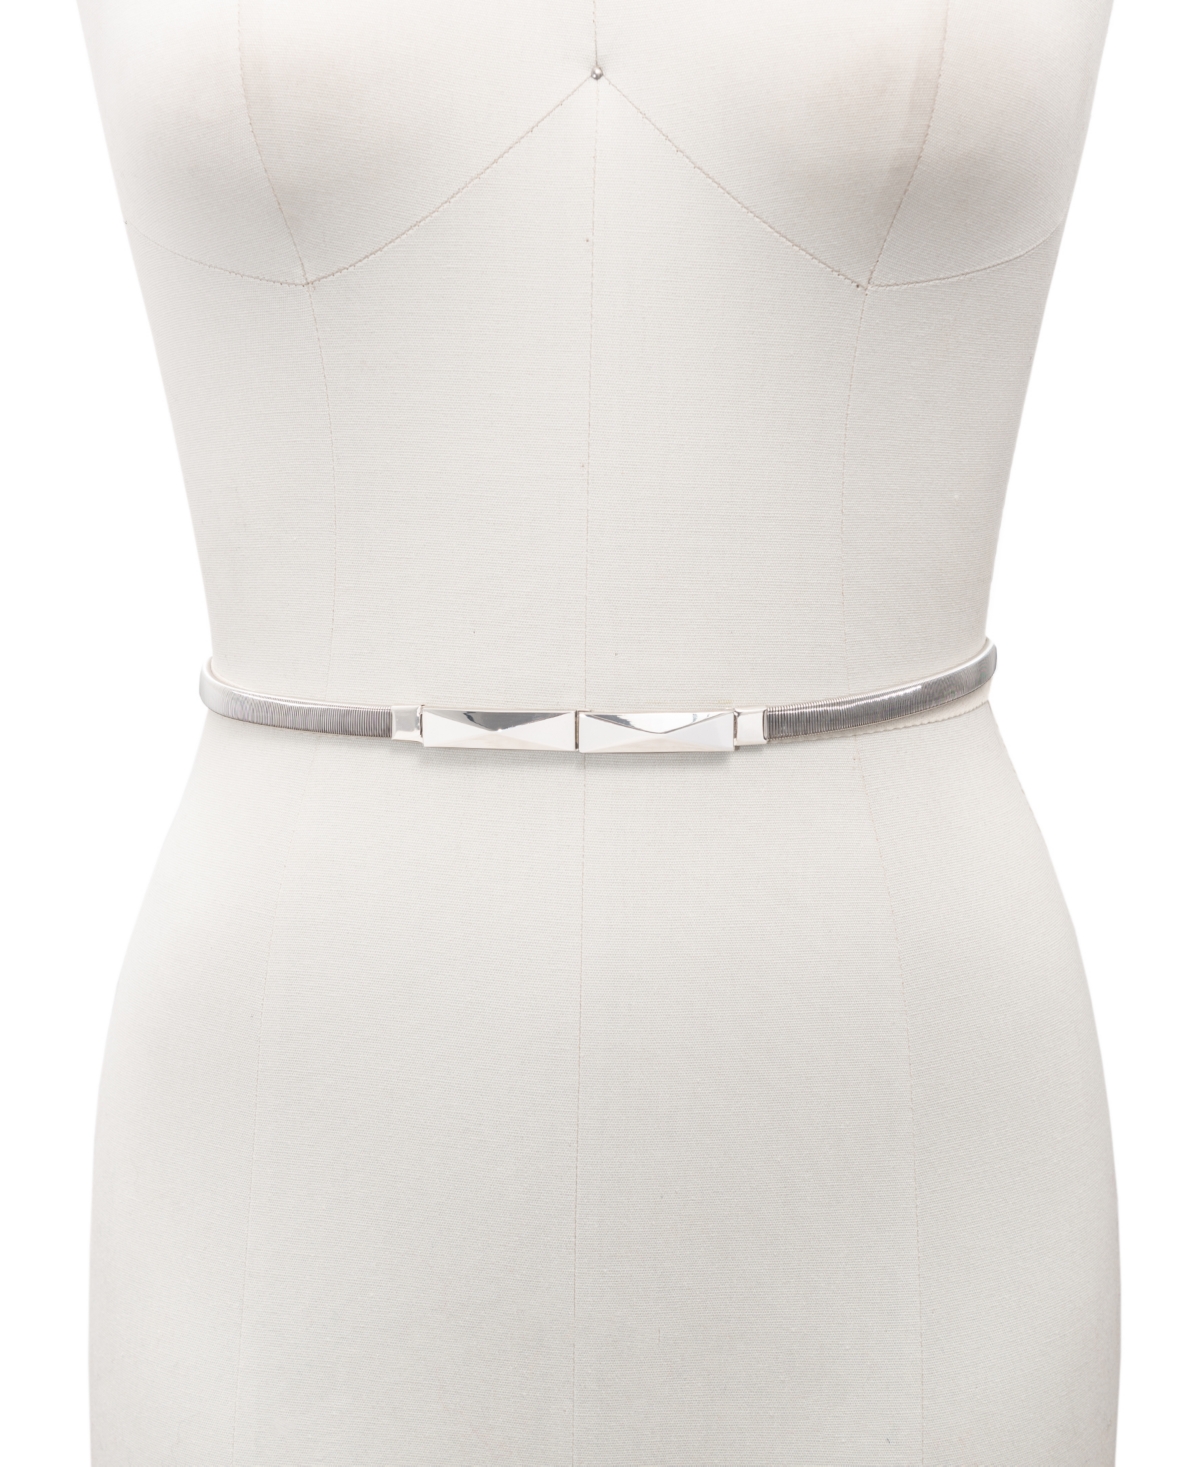 Metal Stretch Belt, Created for Macy's - Gold